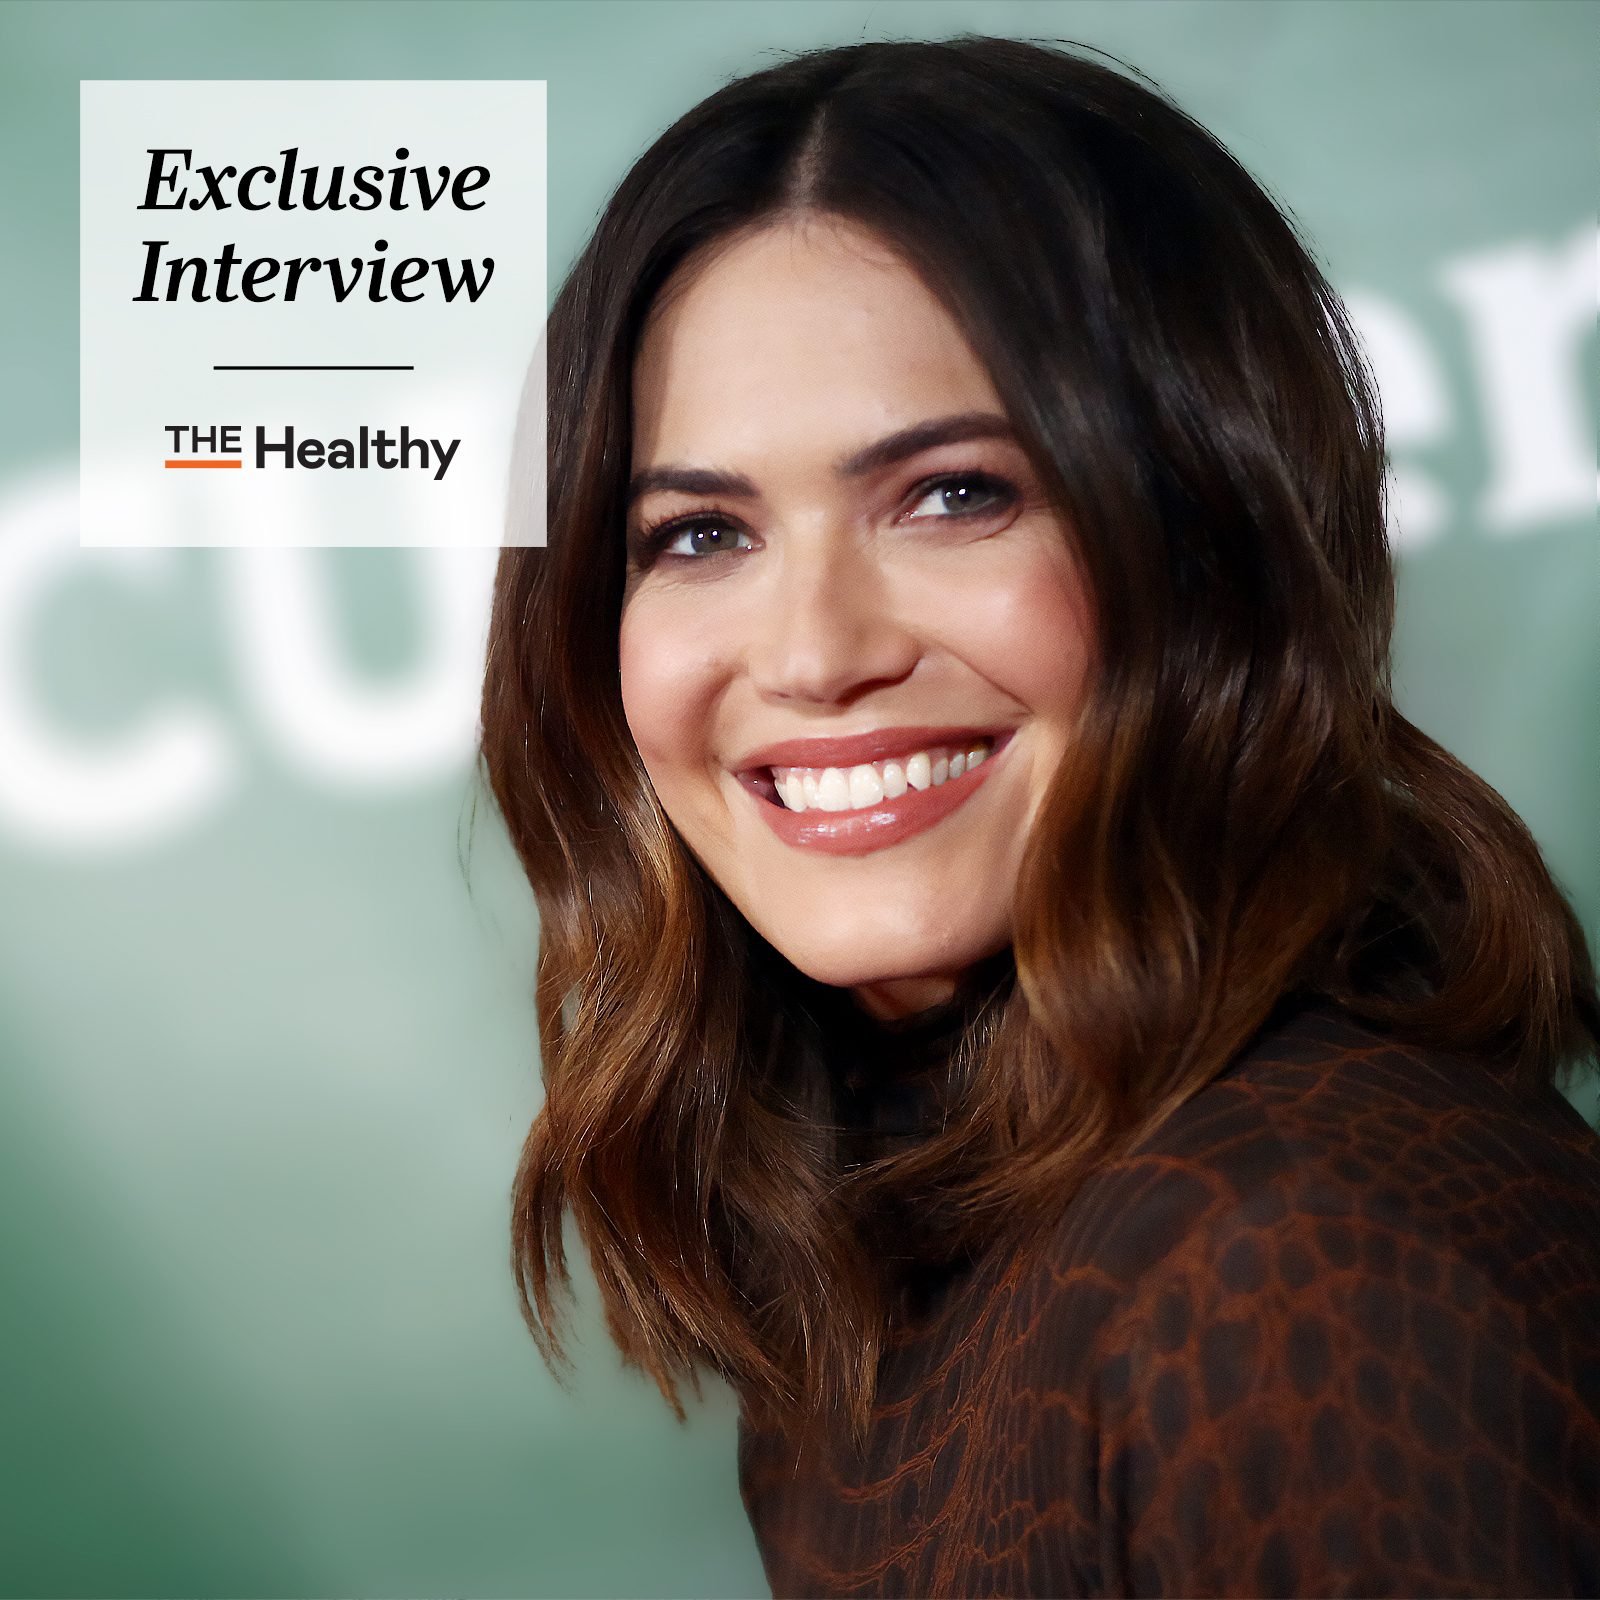 Mandy Moore Gets Candid About a Private Health Struggle